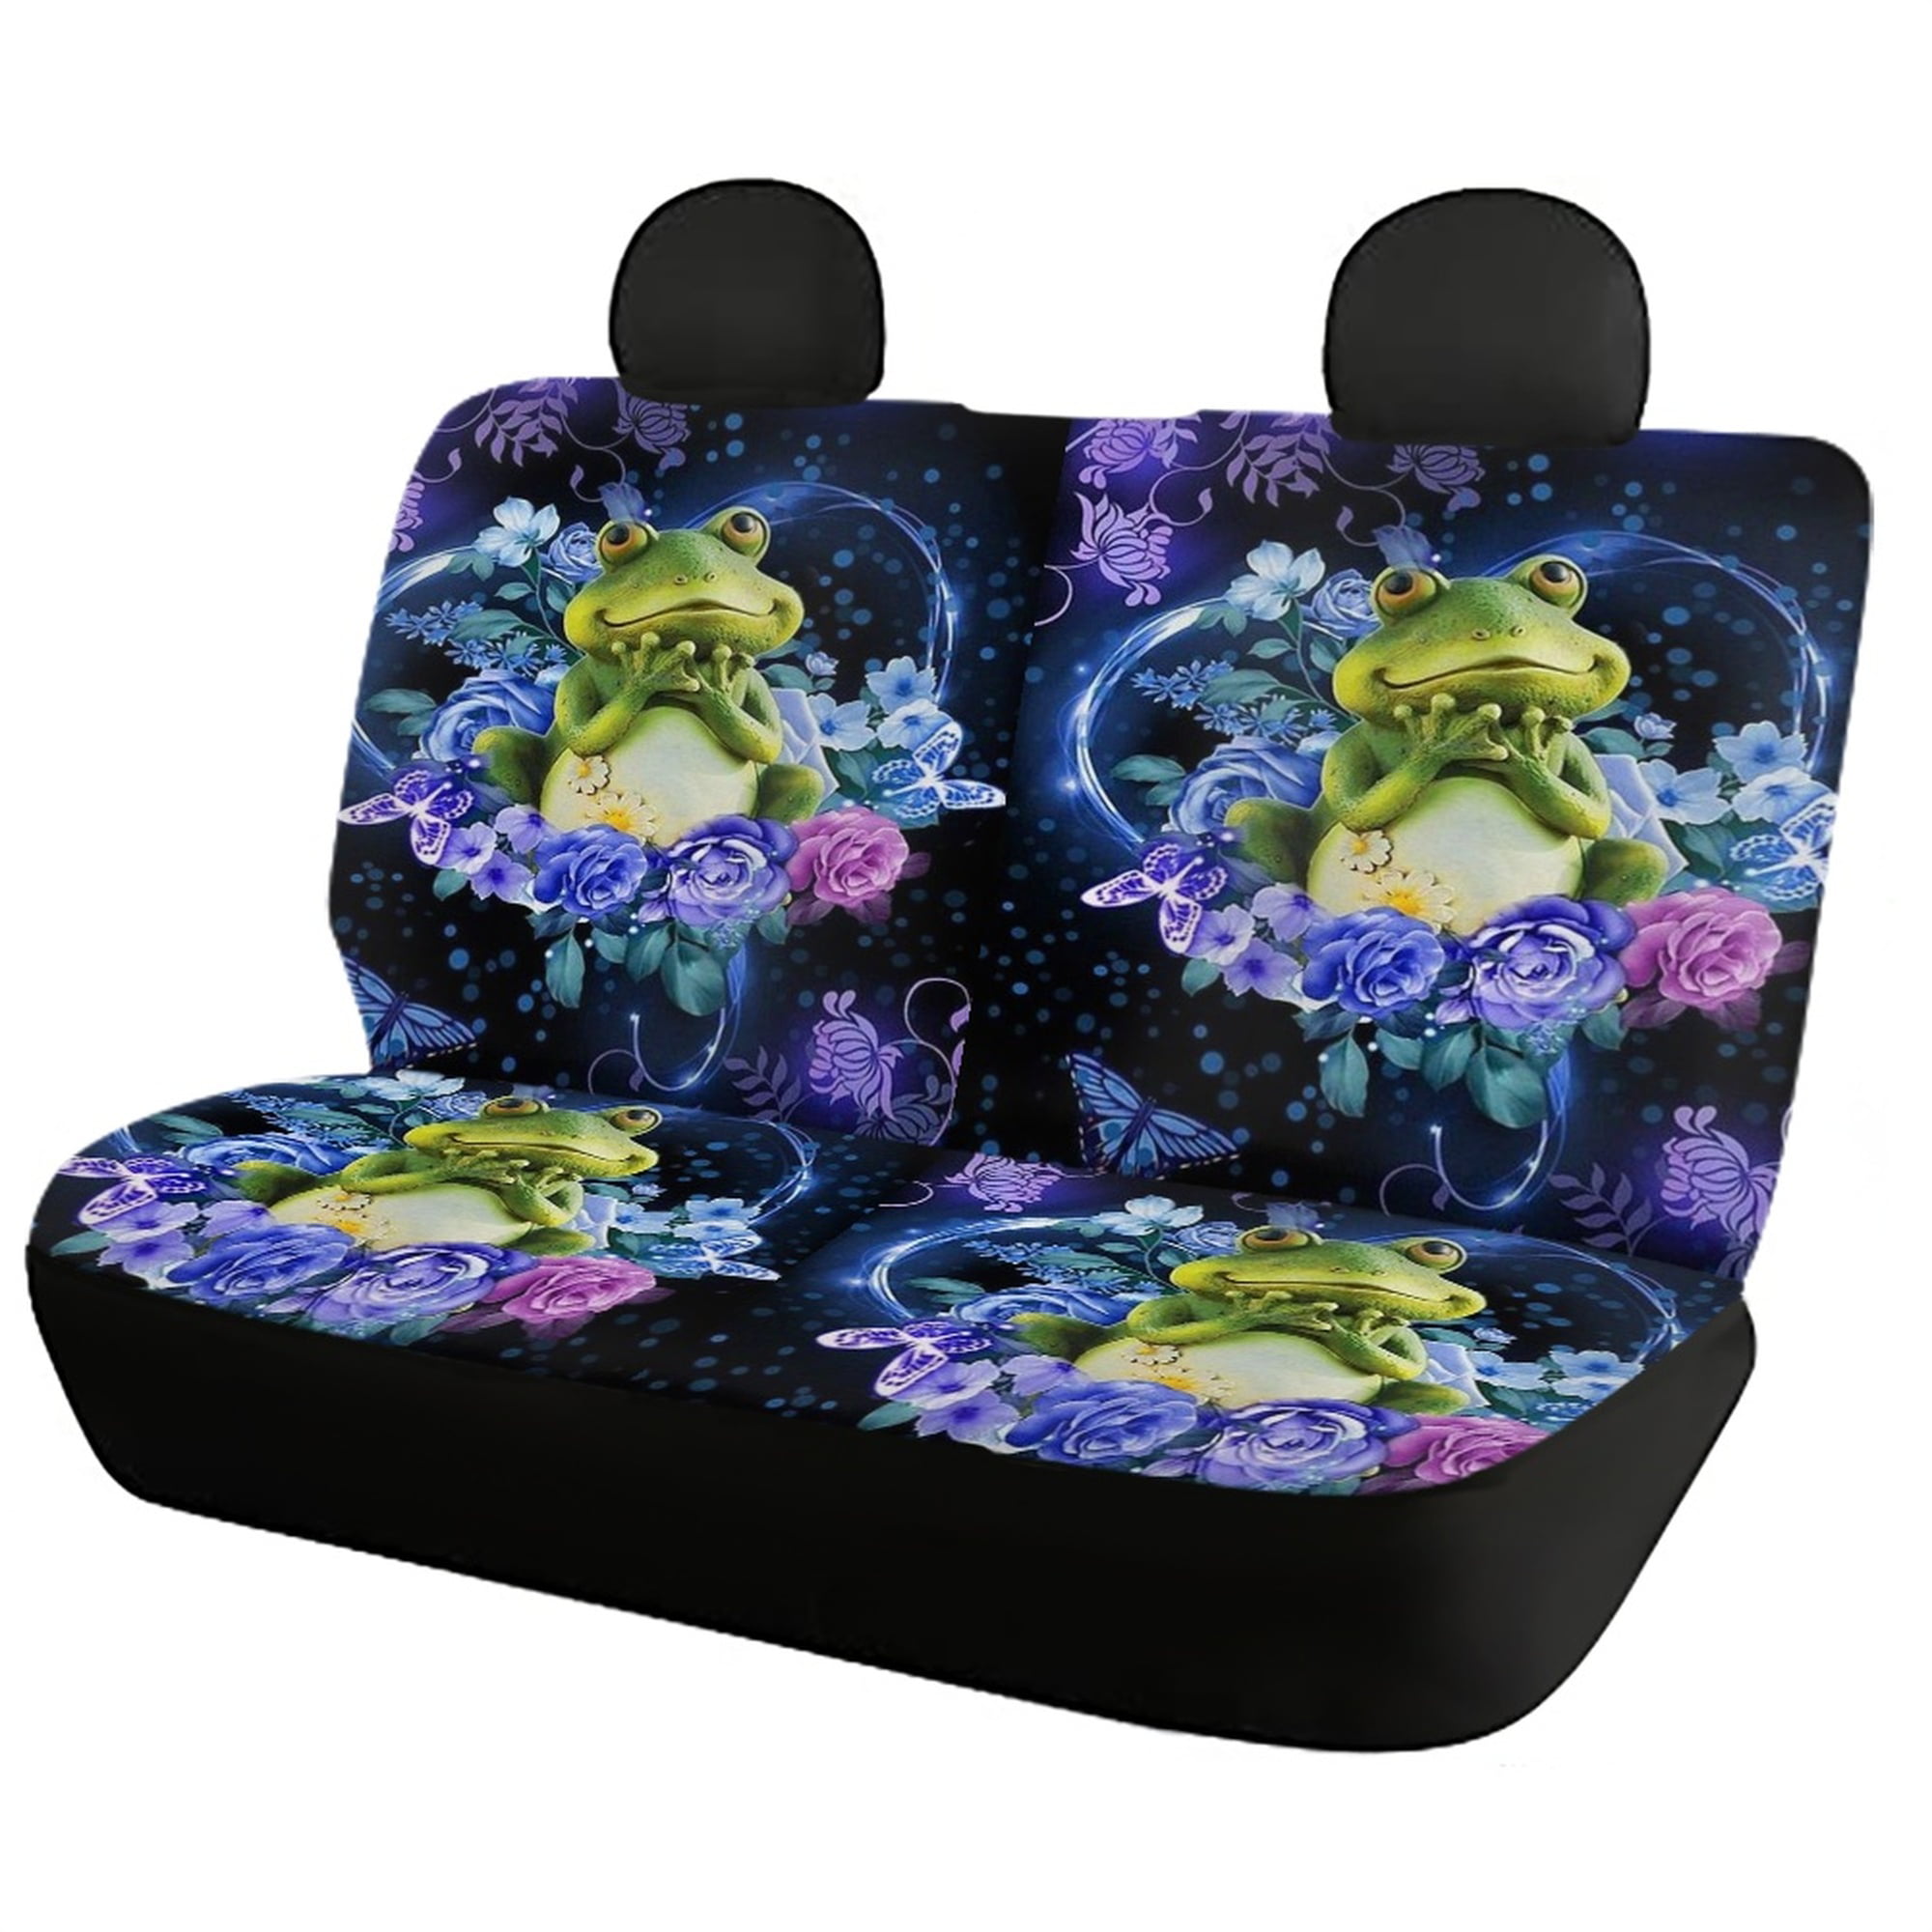 Groovy Flower Car Seat Covers for Vehicle 2 Pc, Vintage Floral 70s Hippie  Cute Front Car SUV Vans Gift Her Women Truck Protector Accessory -   Norway